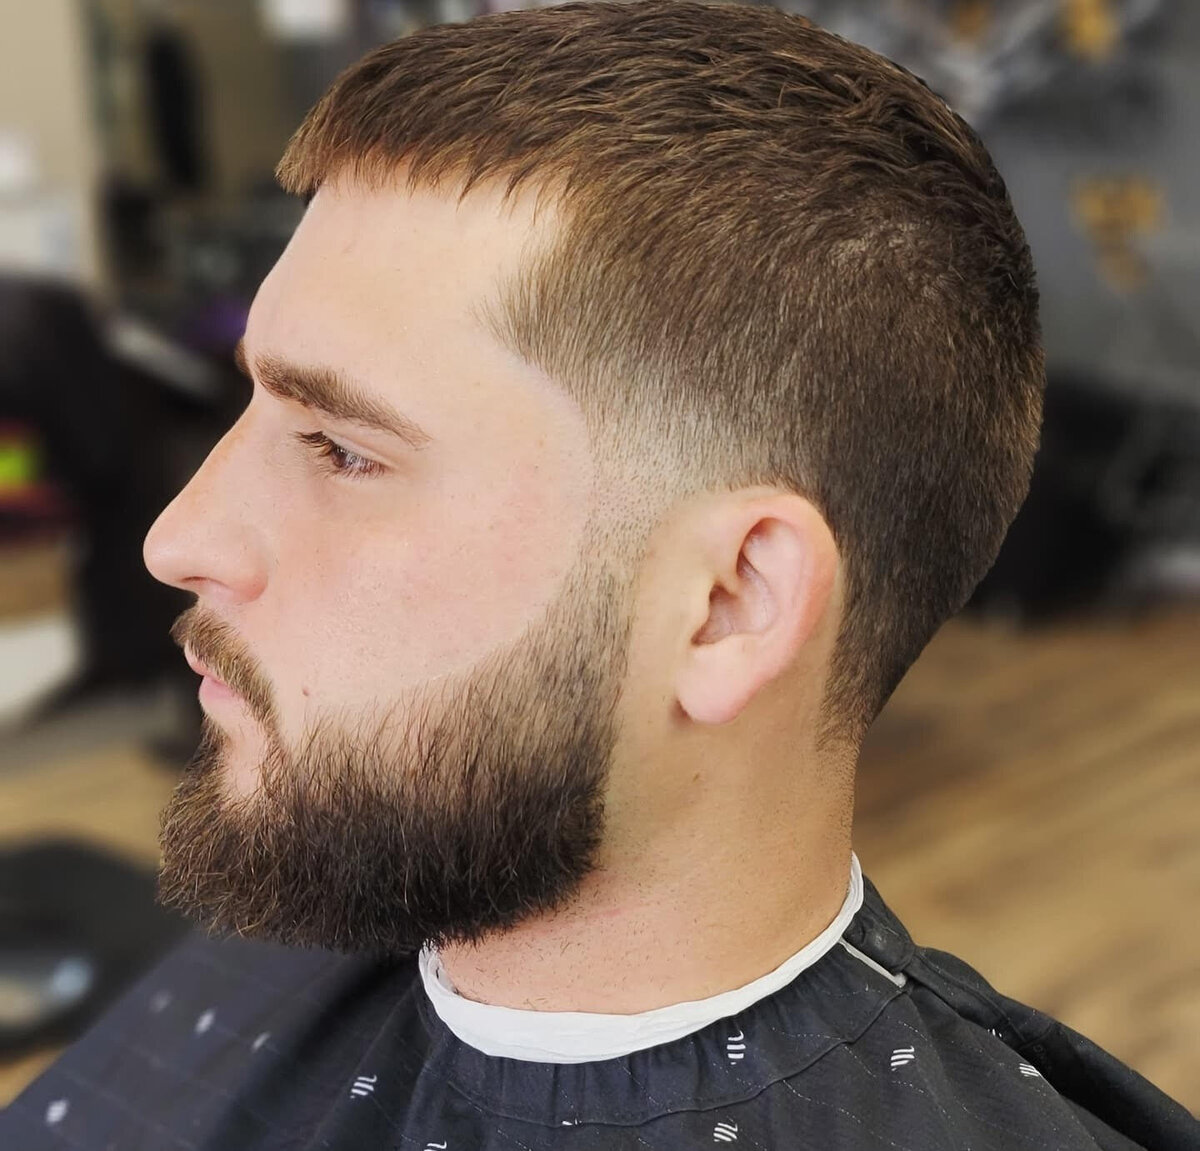 Men's Fade and Shave - Haircut at Whos Your Barber in Venice FL